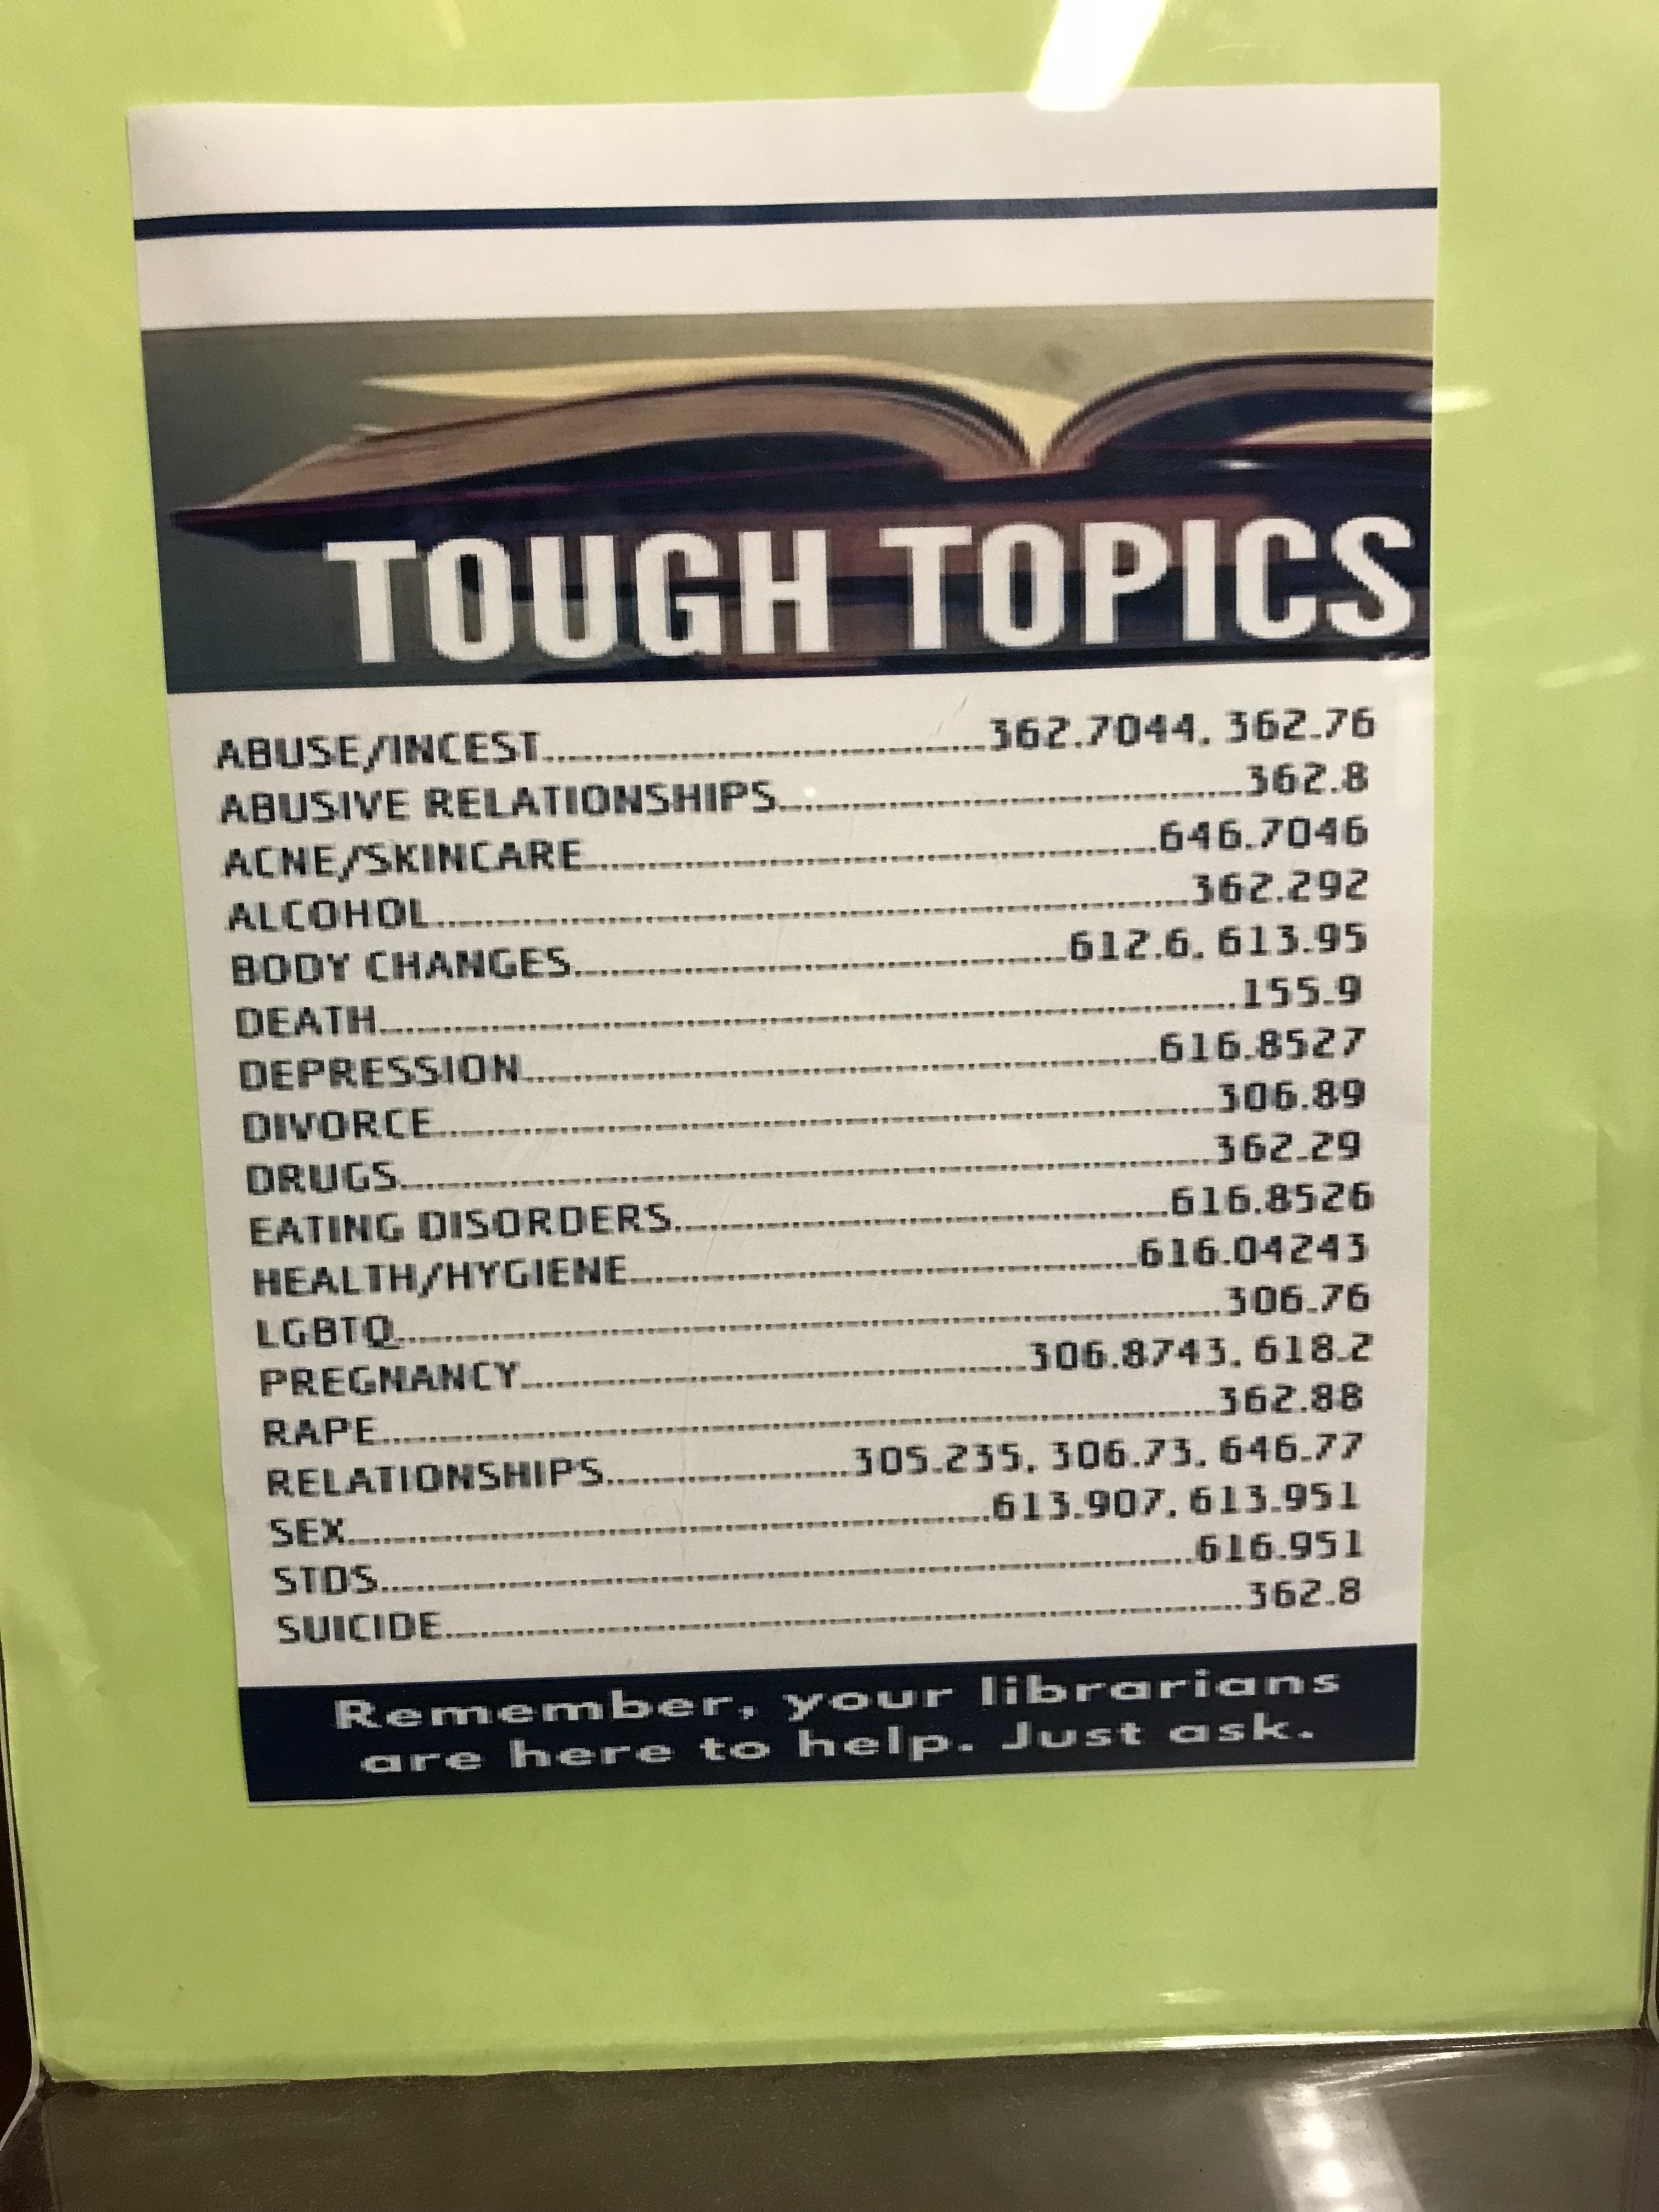 library signs tough topics - Tough Topics AbuseIncest 362.7044, 362.76 Abusive Relationships.... 362.8 AcneSkincare 646.7046 Alcohol 362292 Body Changes 612.6.613.95 Death... 155.9 Depression... 616.8527 Divorce 306.89 Drugs 362.29 Eating Disorders 616.85